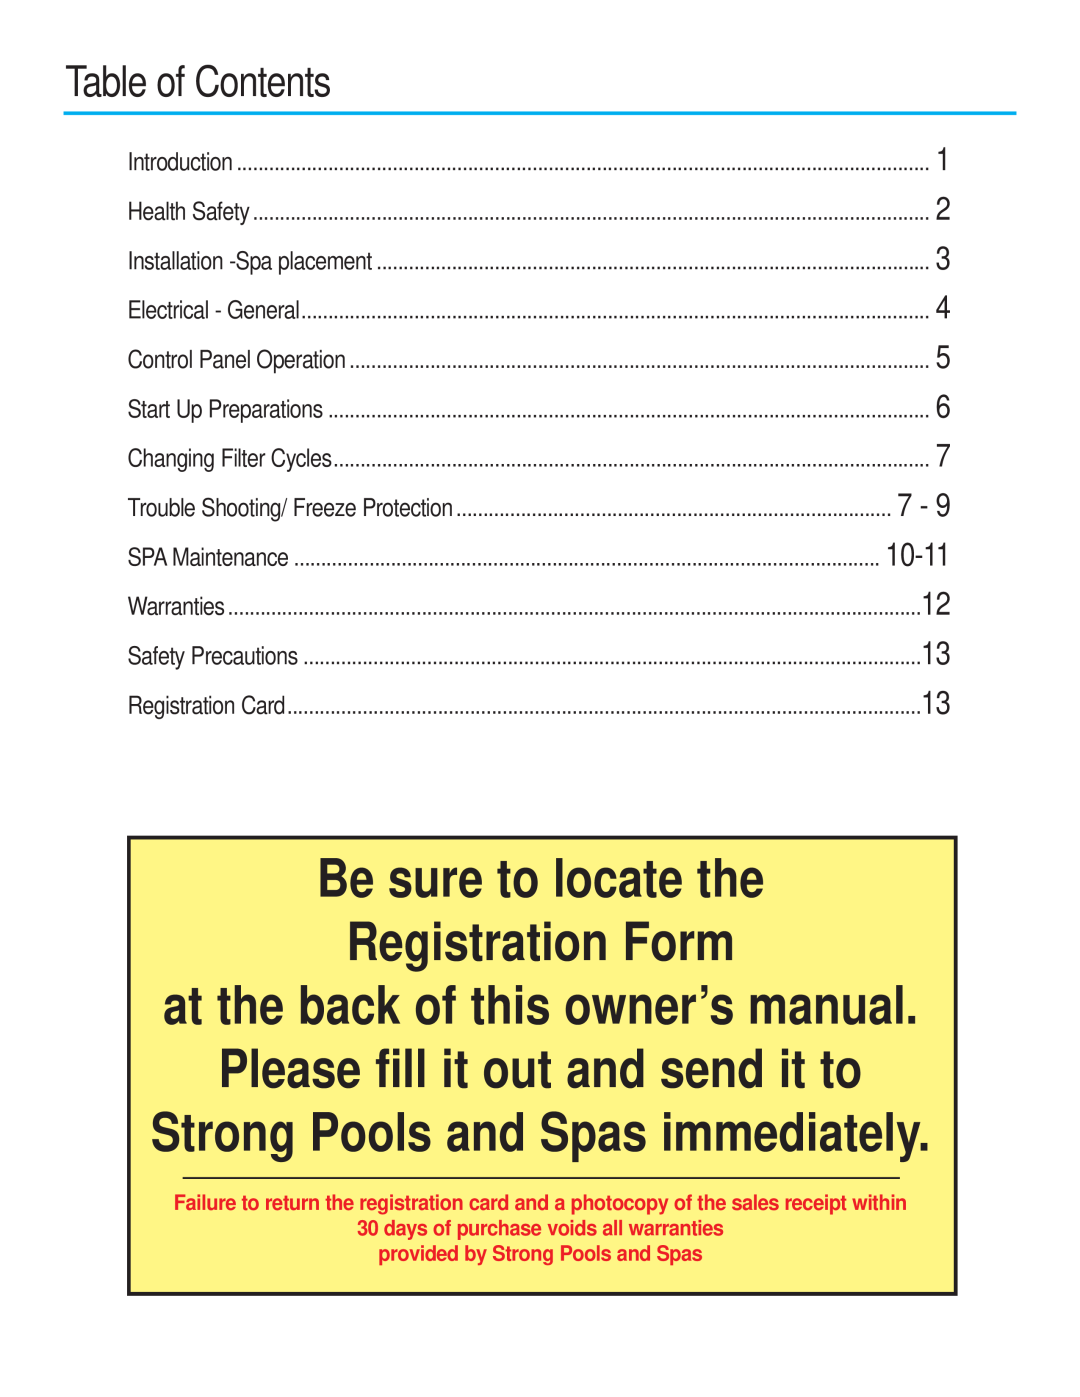 Strong Pools and Spas Vienna Table of Contents, Be sure to locate the Registration Form, Please fill it out and send it to 